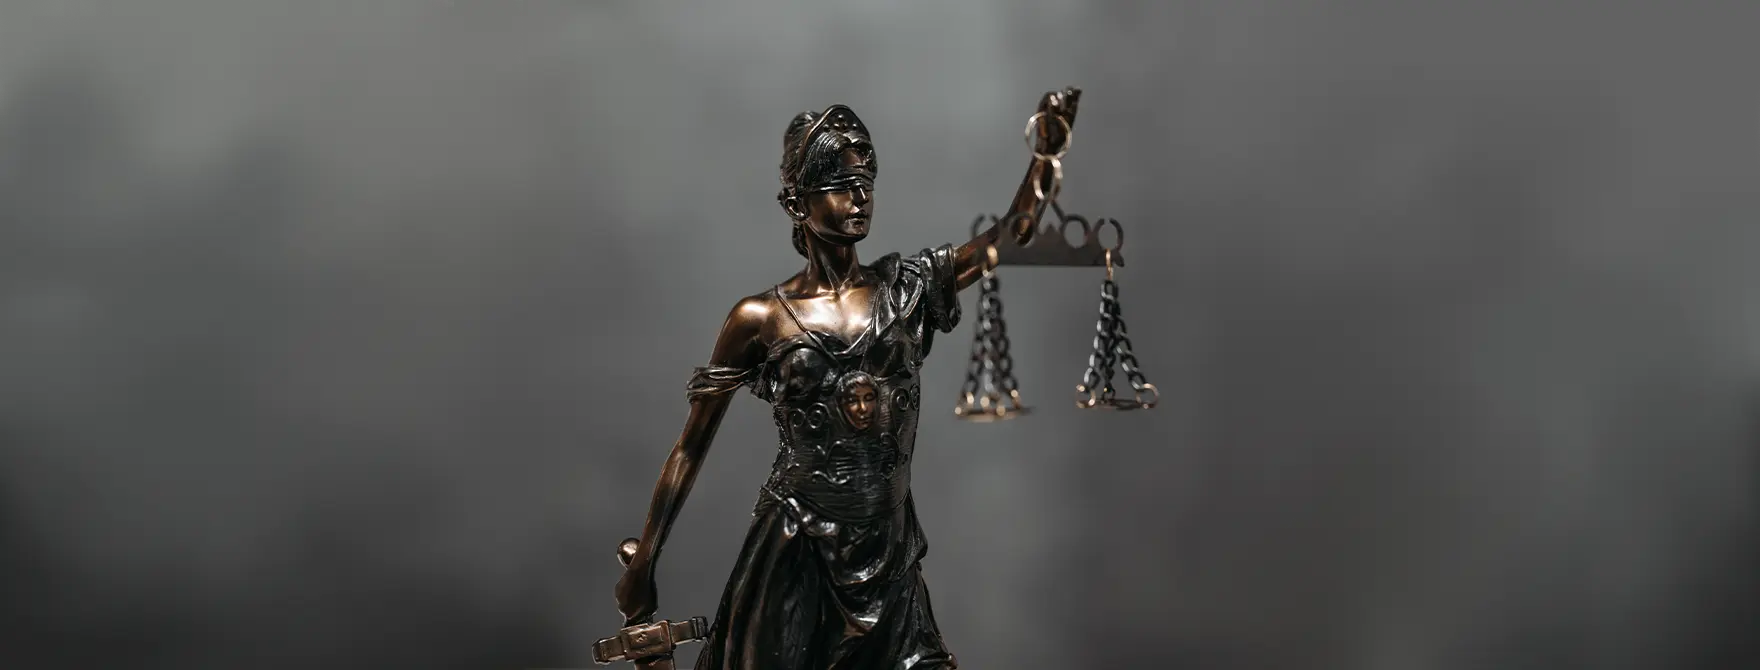 A statue of Lady Justice in front of a gray background.